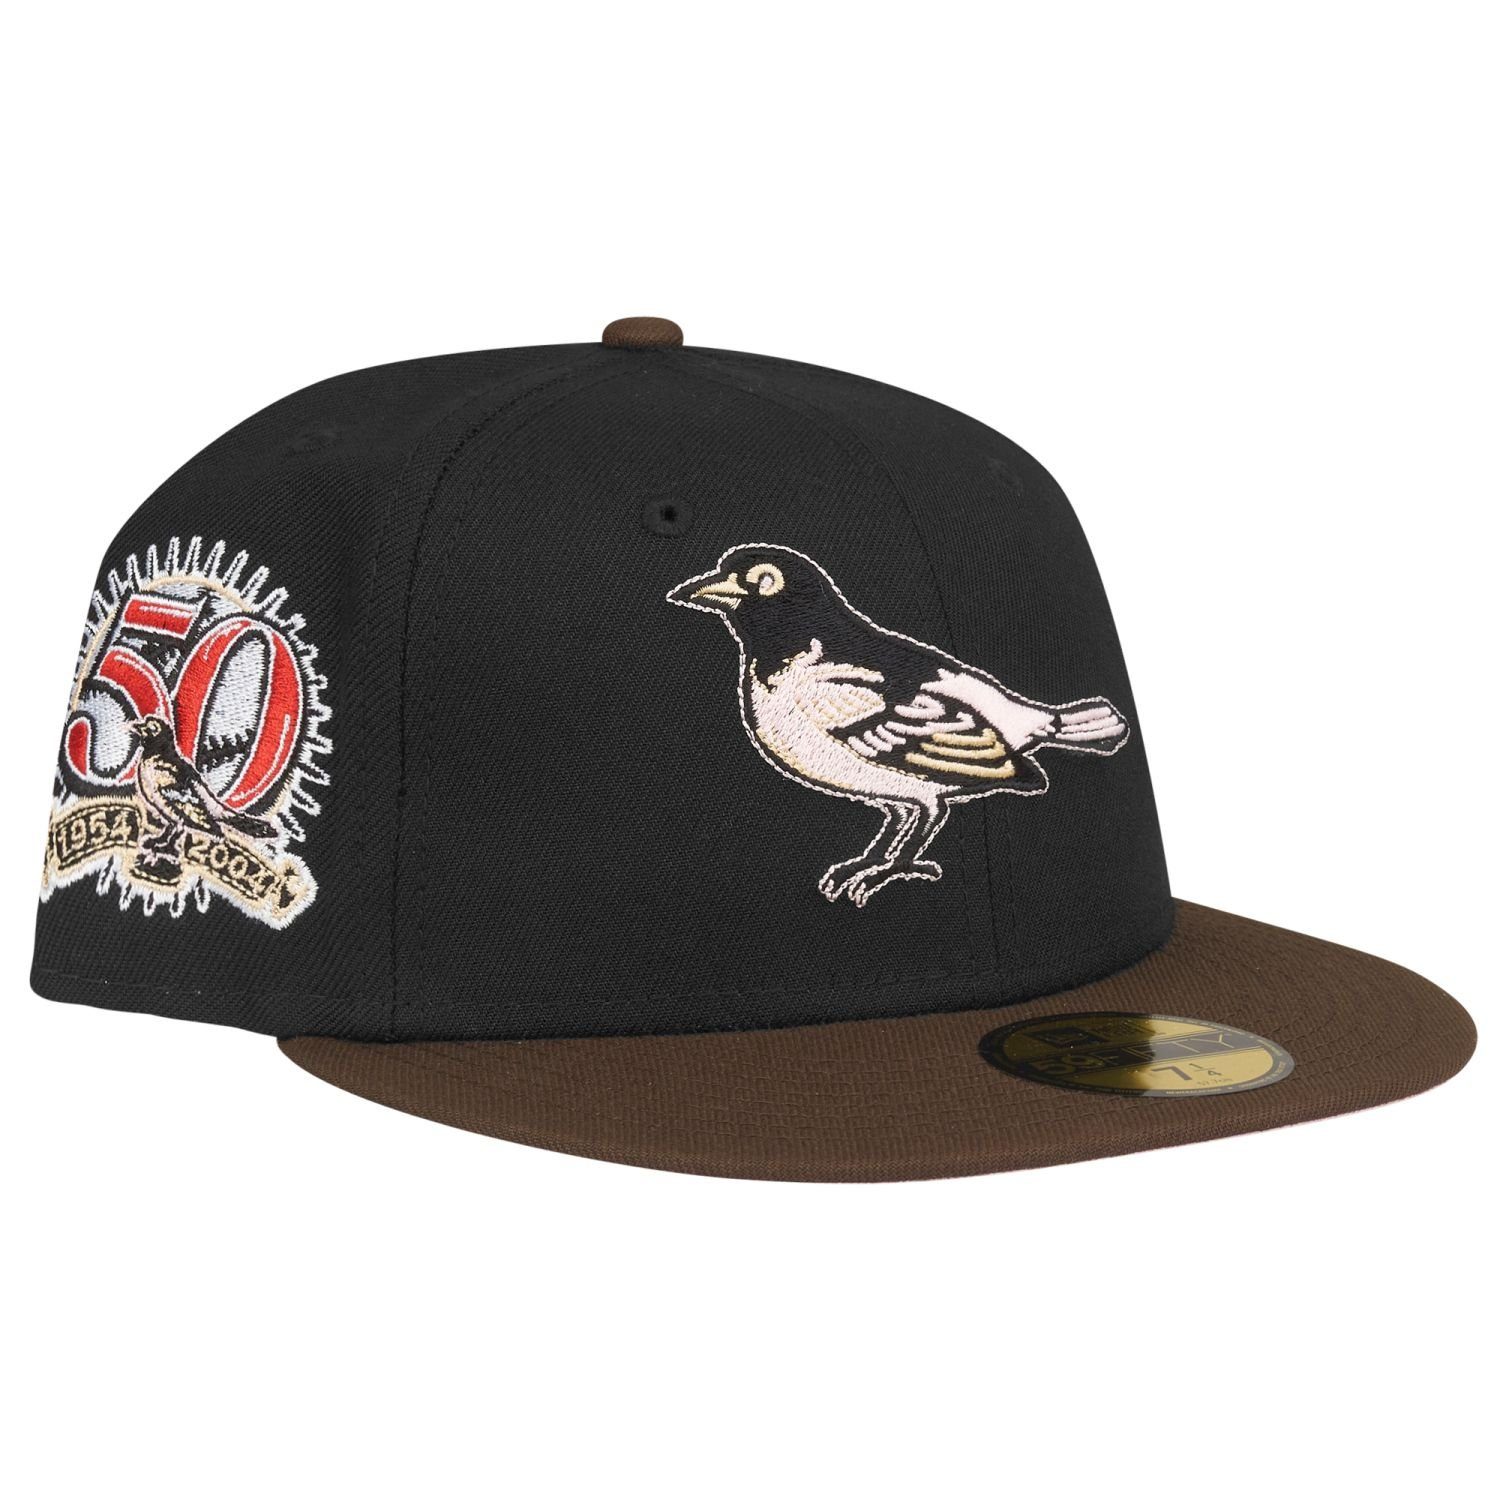 New Era Fitted Cap 59Fifty COOPERSTOWN Baltimore Orioles